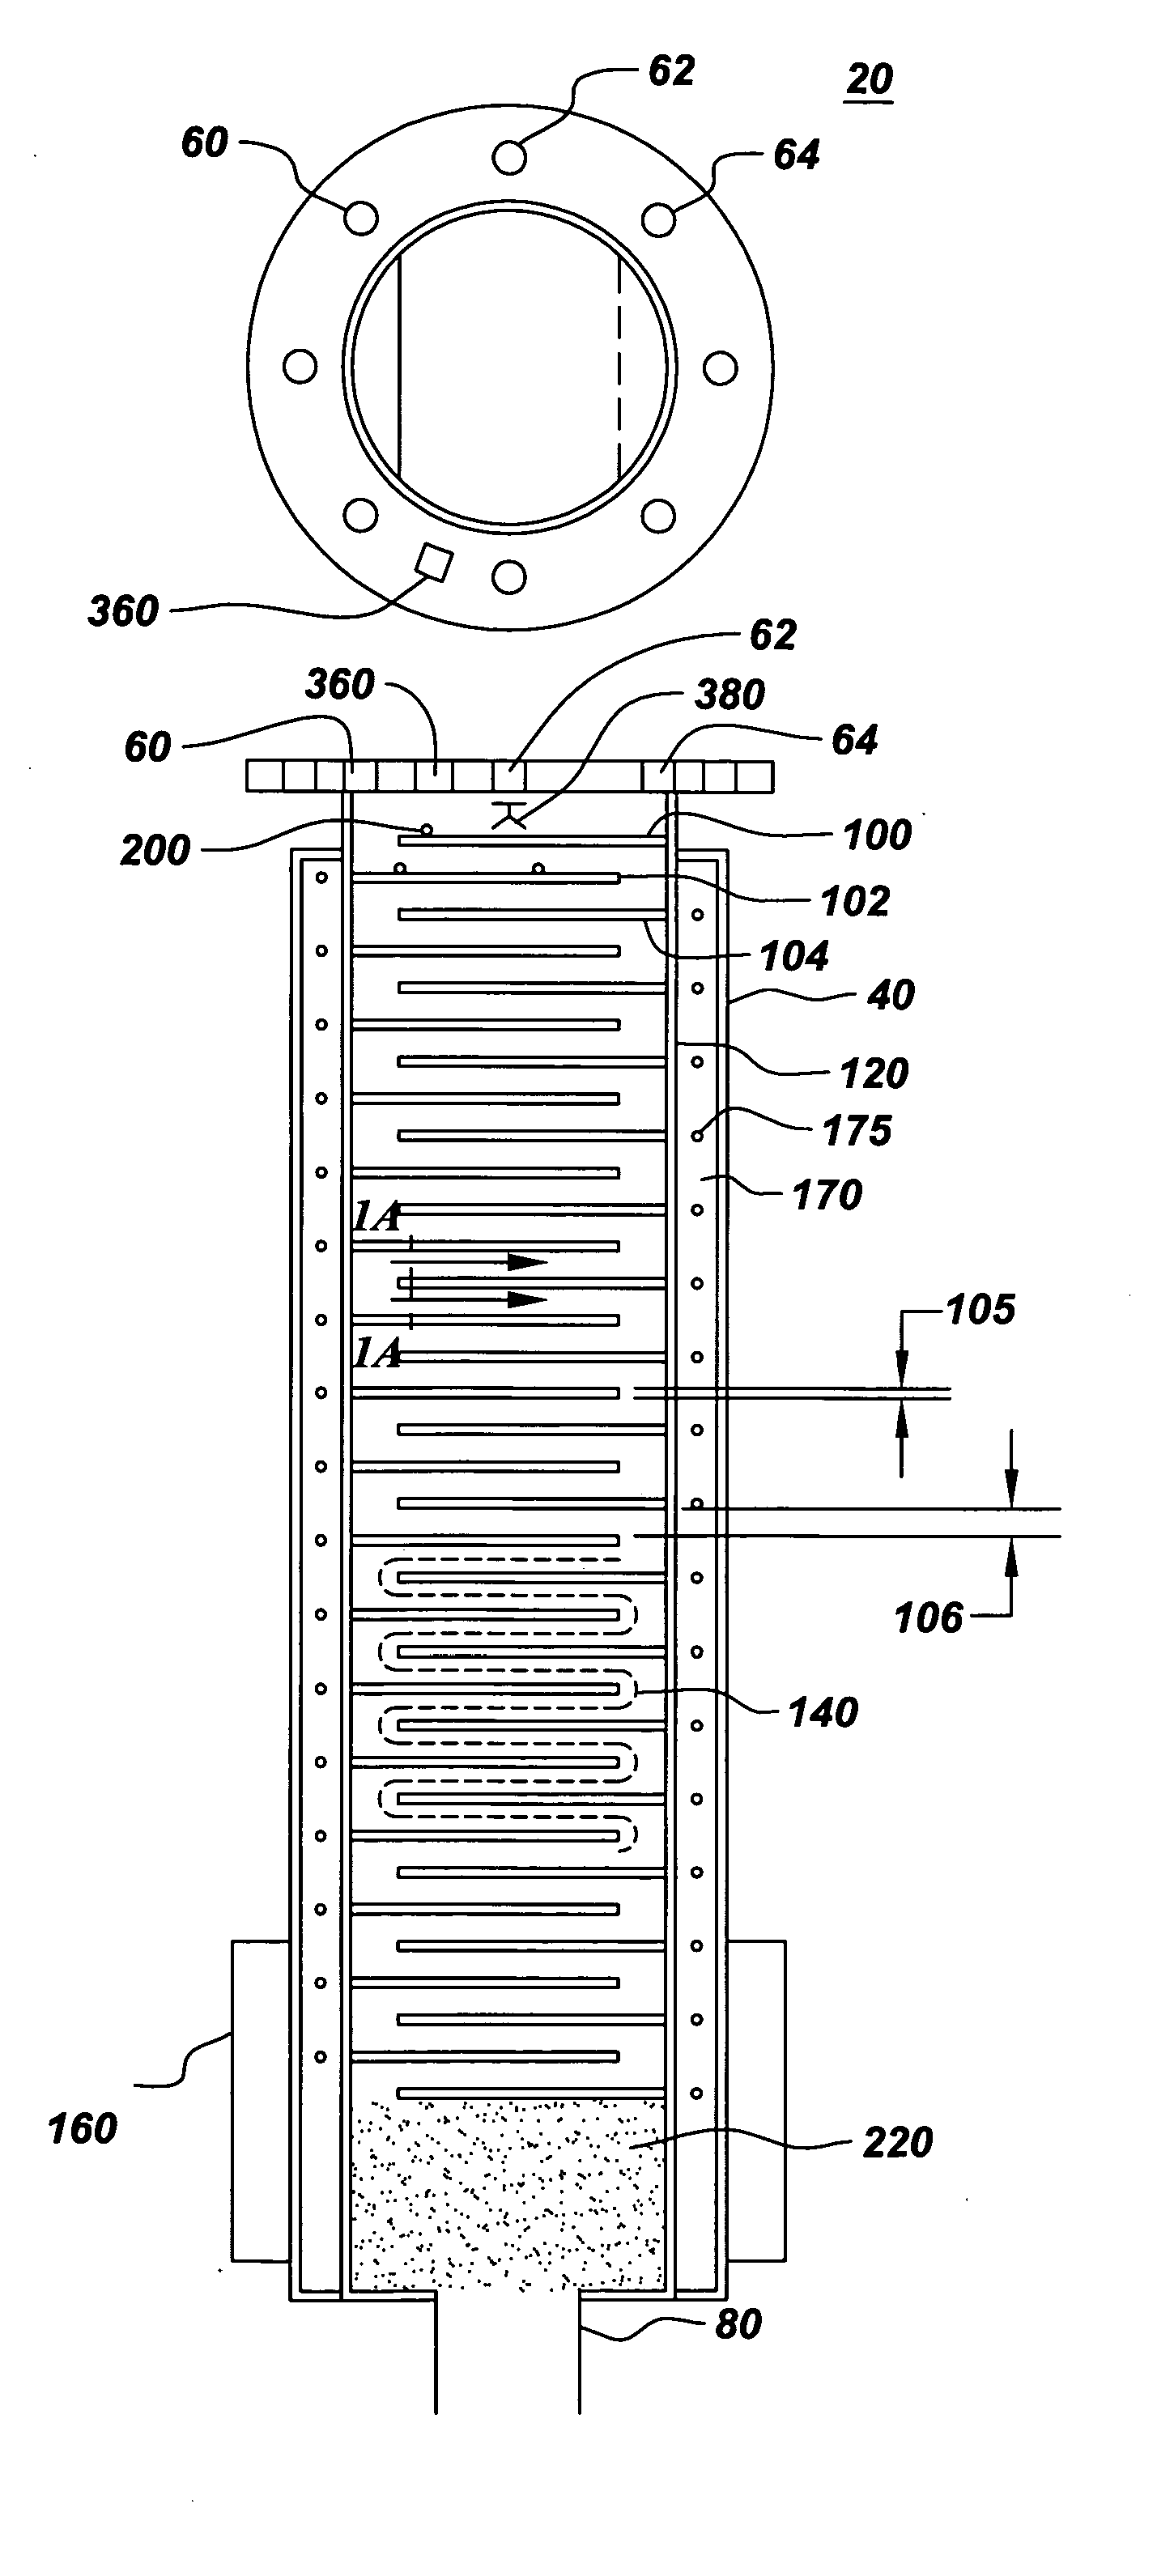 Apparatus for the evaporation of aqueous organic liquids and the production of powder pre-forms in flame hydrolysis processes